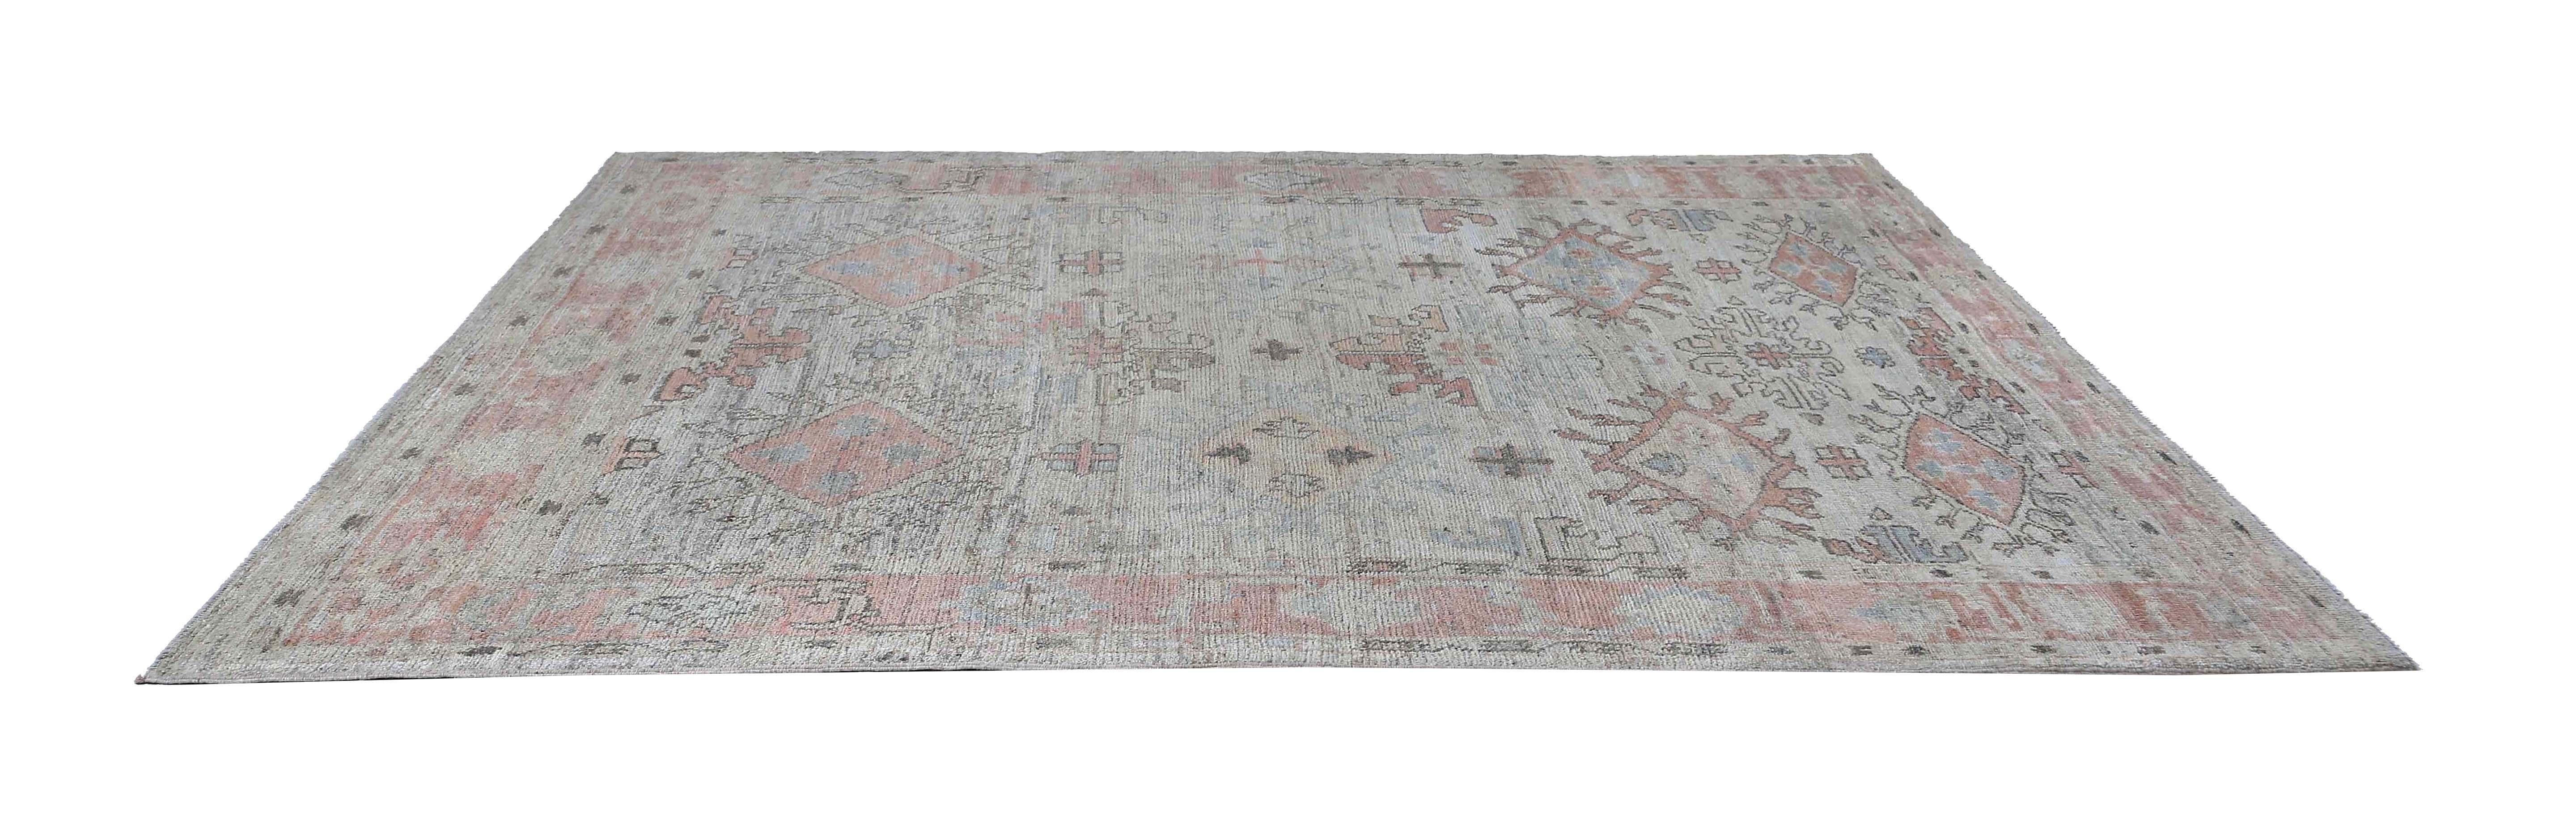 Introducing a stunning oushak rug from Turkey, measuring 6'8'' x 9'2''. This rug features a light background with beautiful pink accent tones that add a touch of elegance to any space. With its subtle yet intricate design, this rug is sure to make a